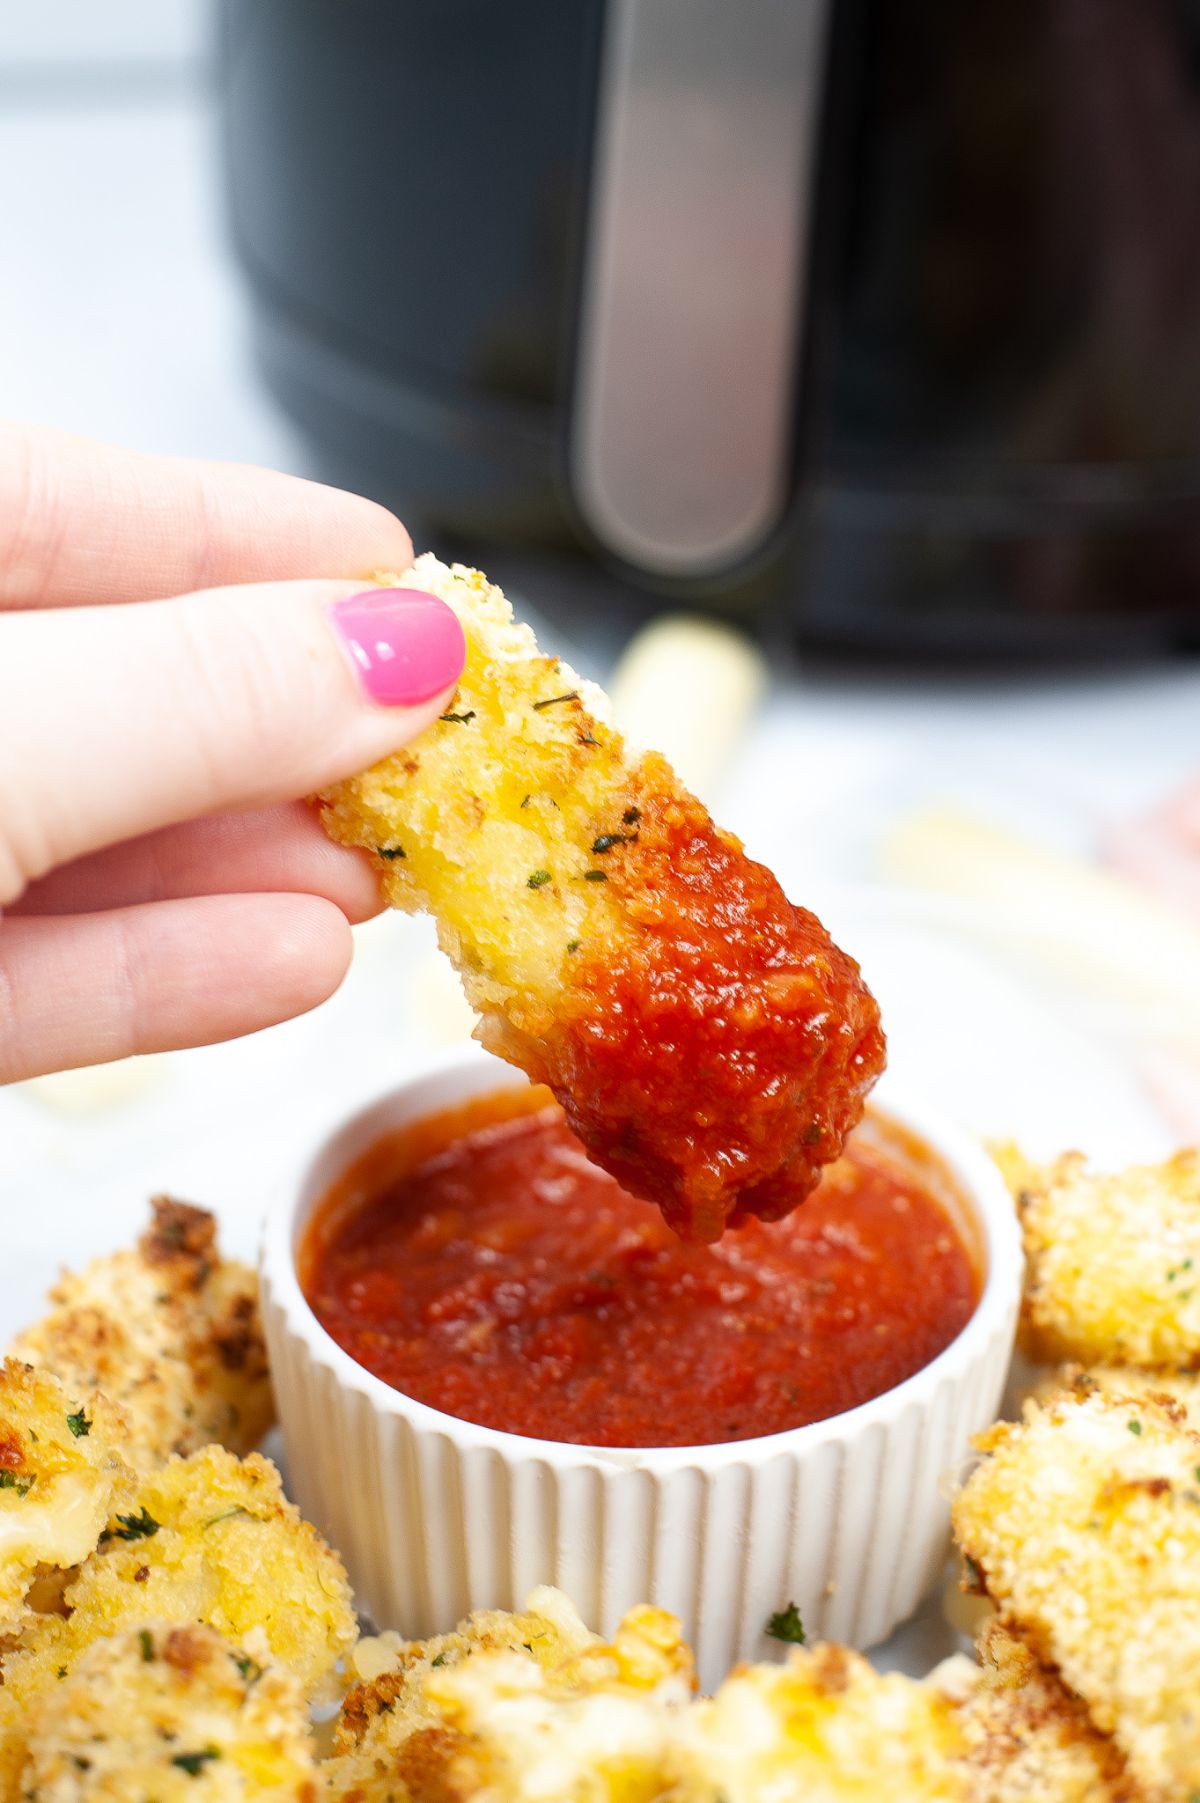 A piece of mozzarella stick being dipped in a red sauce.